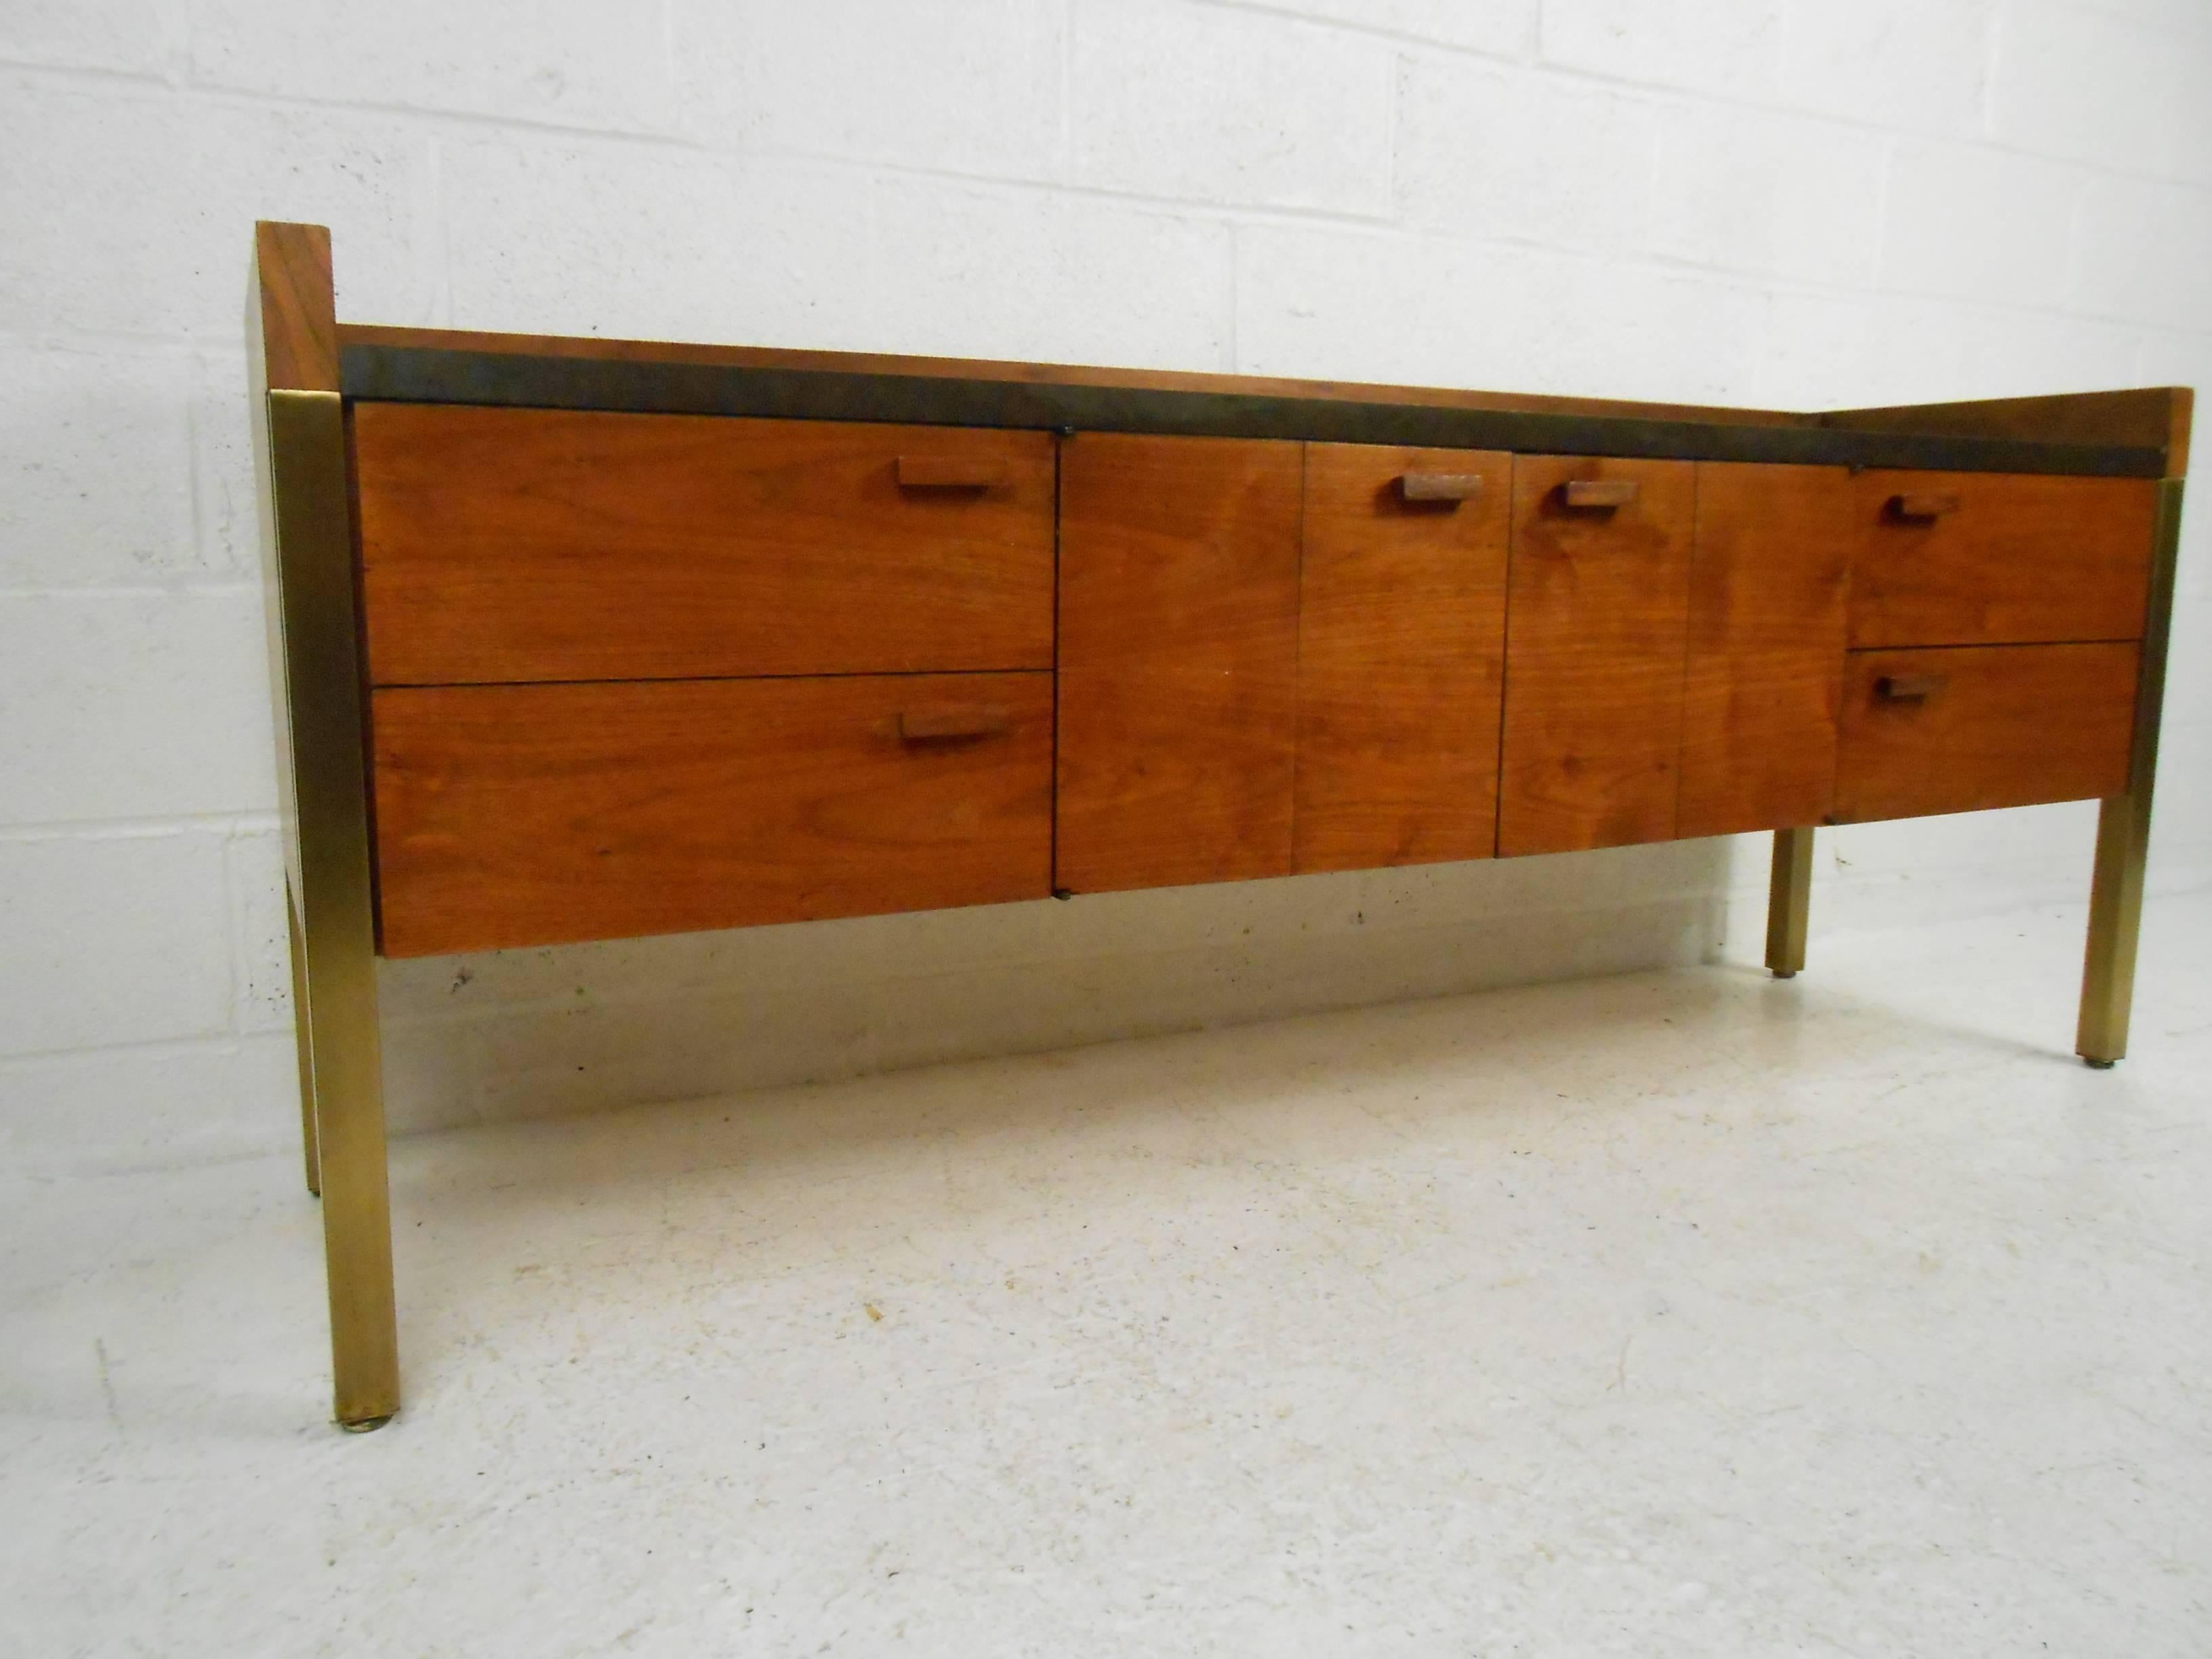 Stunning vintage modern sideboard with four drawers and a two folding cabinets hiding a compartment in the centre. This beautiful case piece features a black formica top with raised wood edges surrounding the sides and back. Unusual carved pulls,